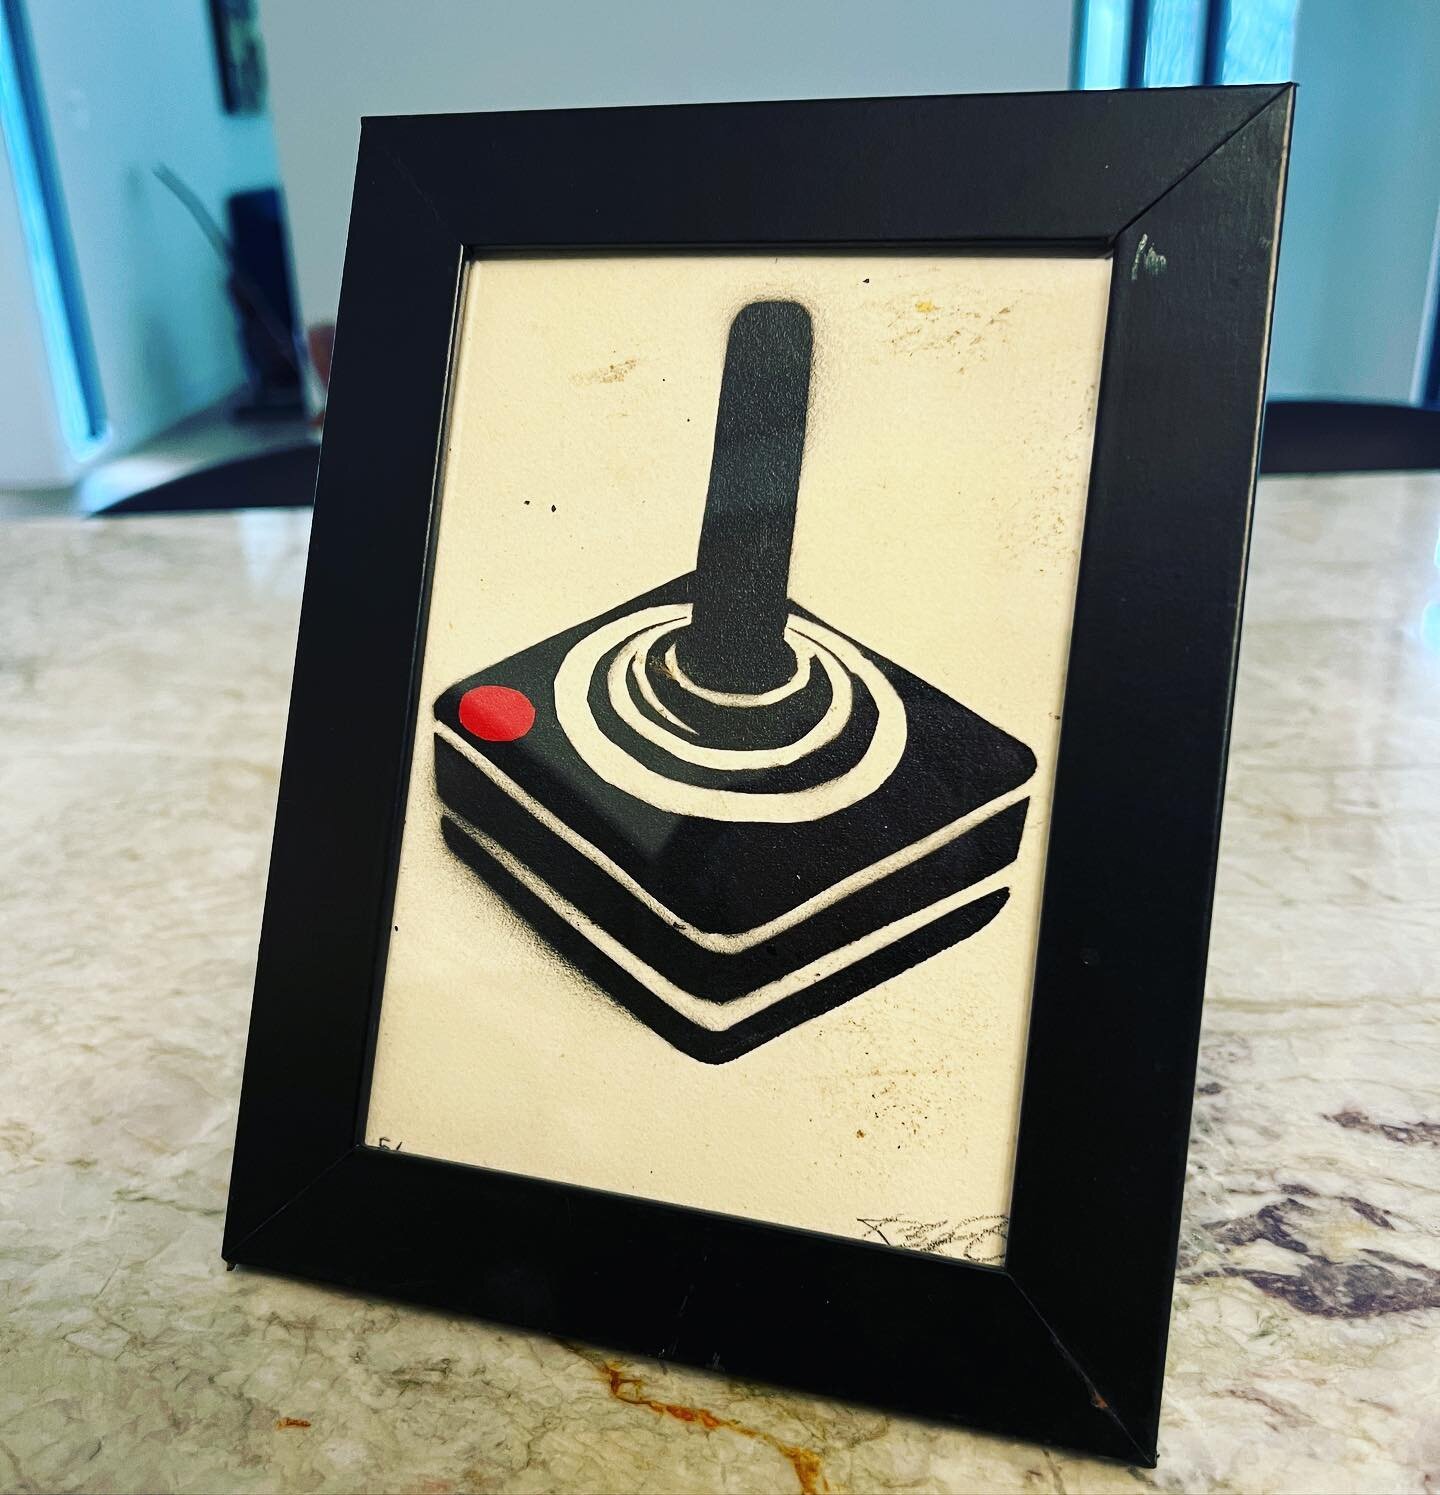 Oldie but a goodie. This was a small limited stencil run I did for @jimdaichendt &lsquo;s book Stay Up! LOs Angeles Street Art Book. Nice to see it framed up. #streetart #losangeles #stencil #destroyalldesign #stayupla #art #joystick #gameover